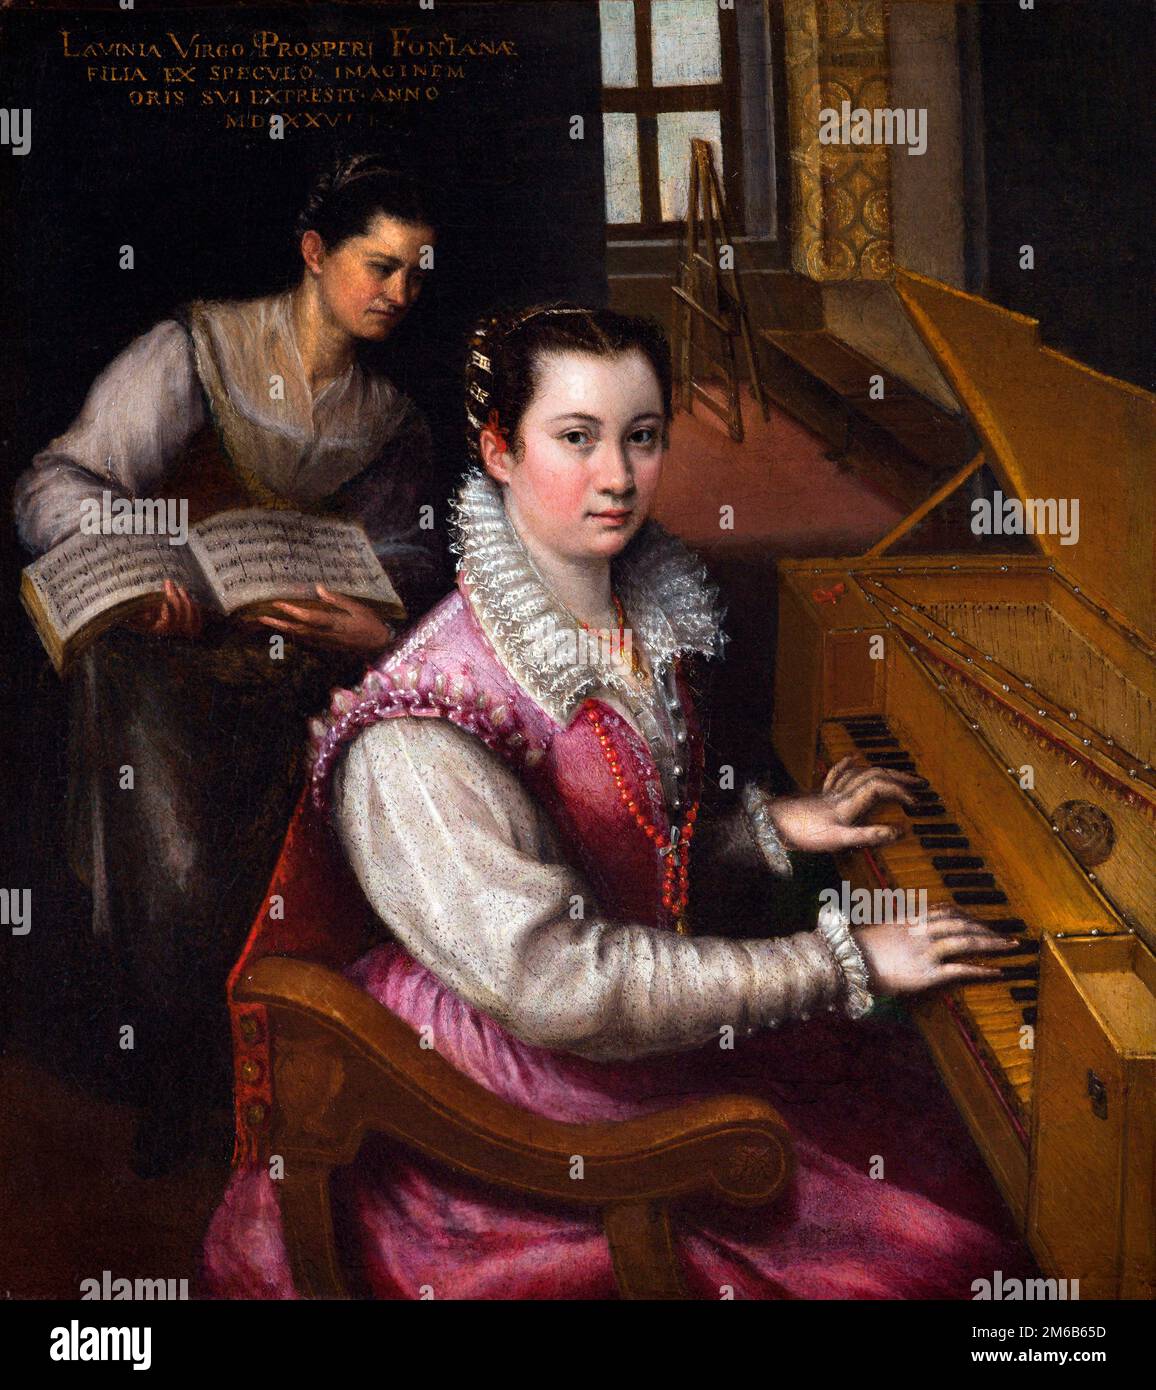 Lavinia Fontana. Self portrait at the Spinet by the Bolognese Mannerist painter, Lavinia Fontana (1552-1614), oil on canvas, 1577 Stock Photo